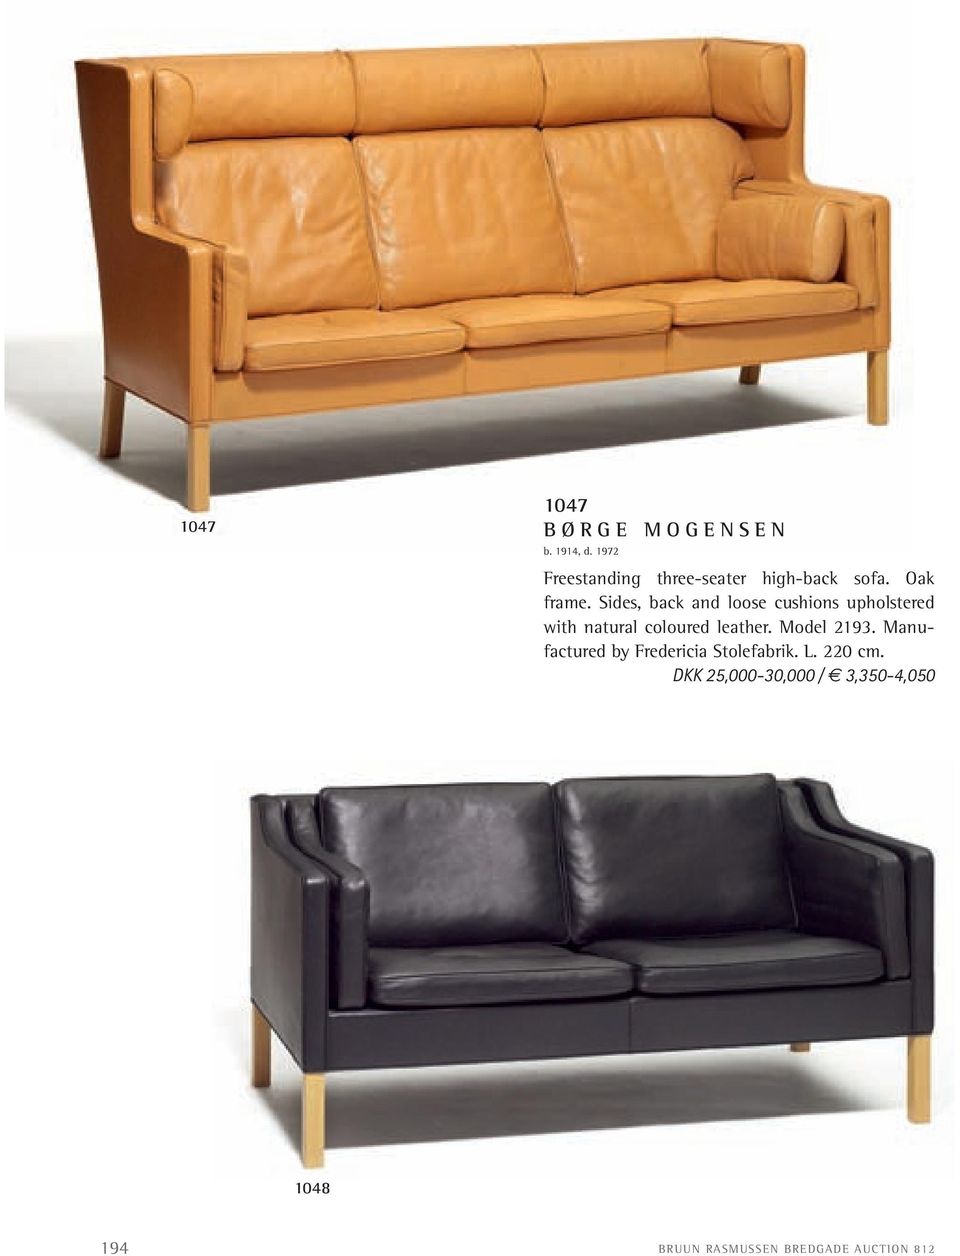 Sides, back and loose cushions upholstered with natural coloured leather.